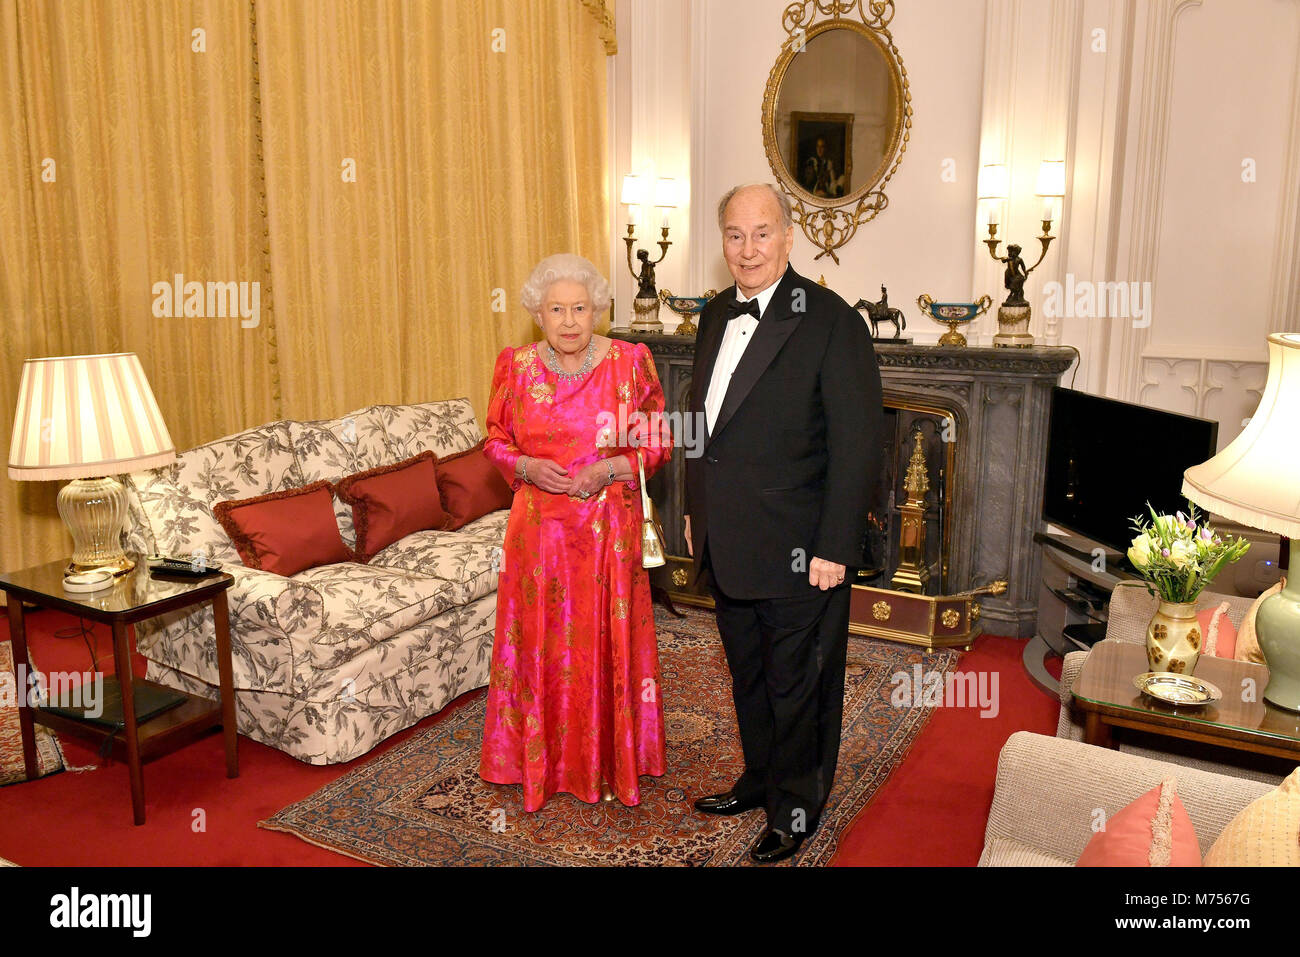 The Queen Elizabeth II and the Aga Khan in the Oak Room at Windsor Castle before she hosts a private dinner in honour of the diamond jubilee of his leadership as Imam of the Shia Ismaili Muslim Community. Stock Photo